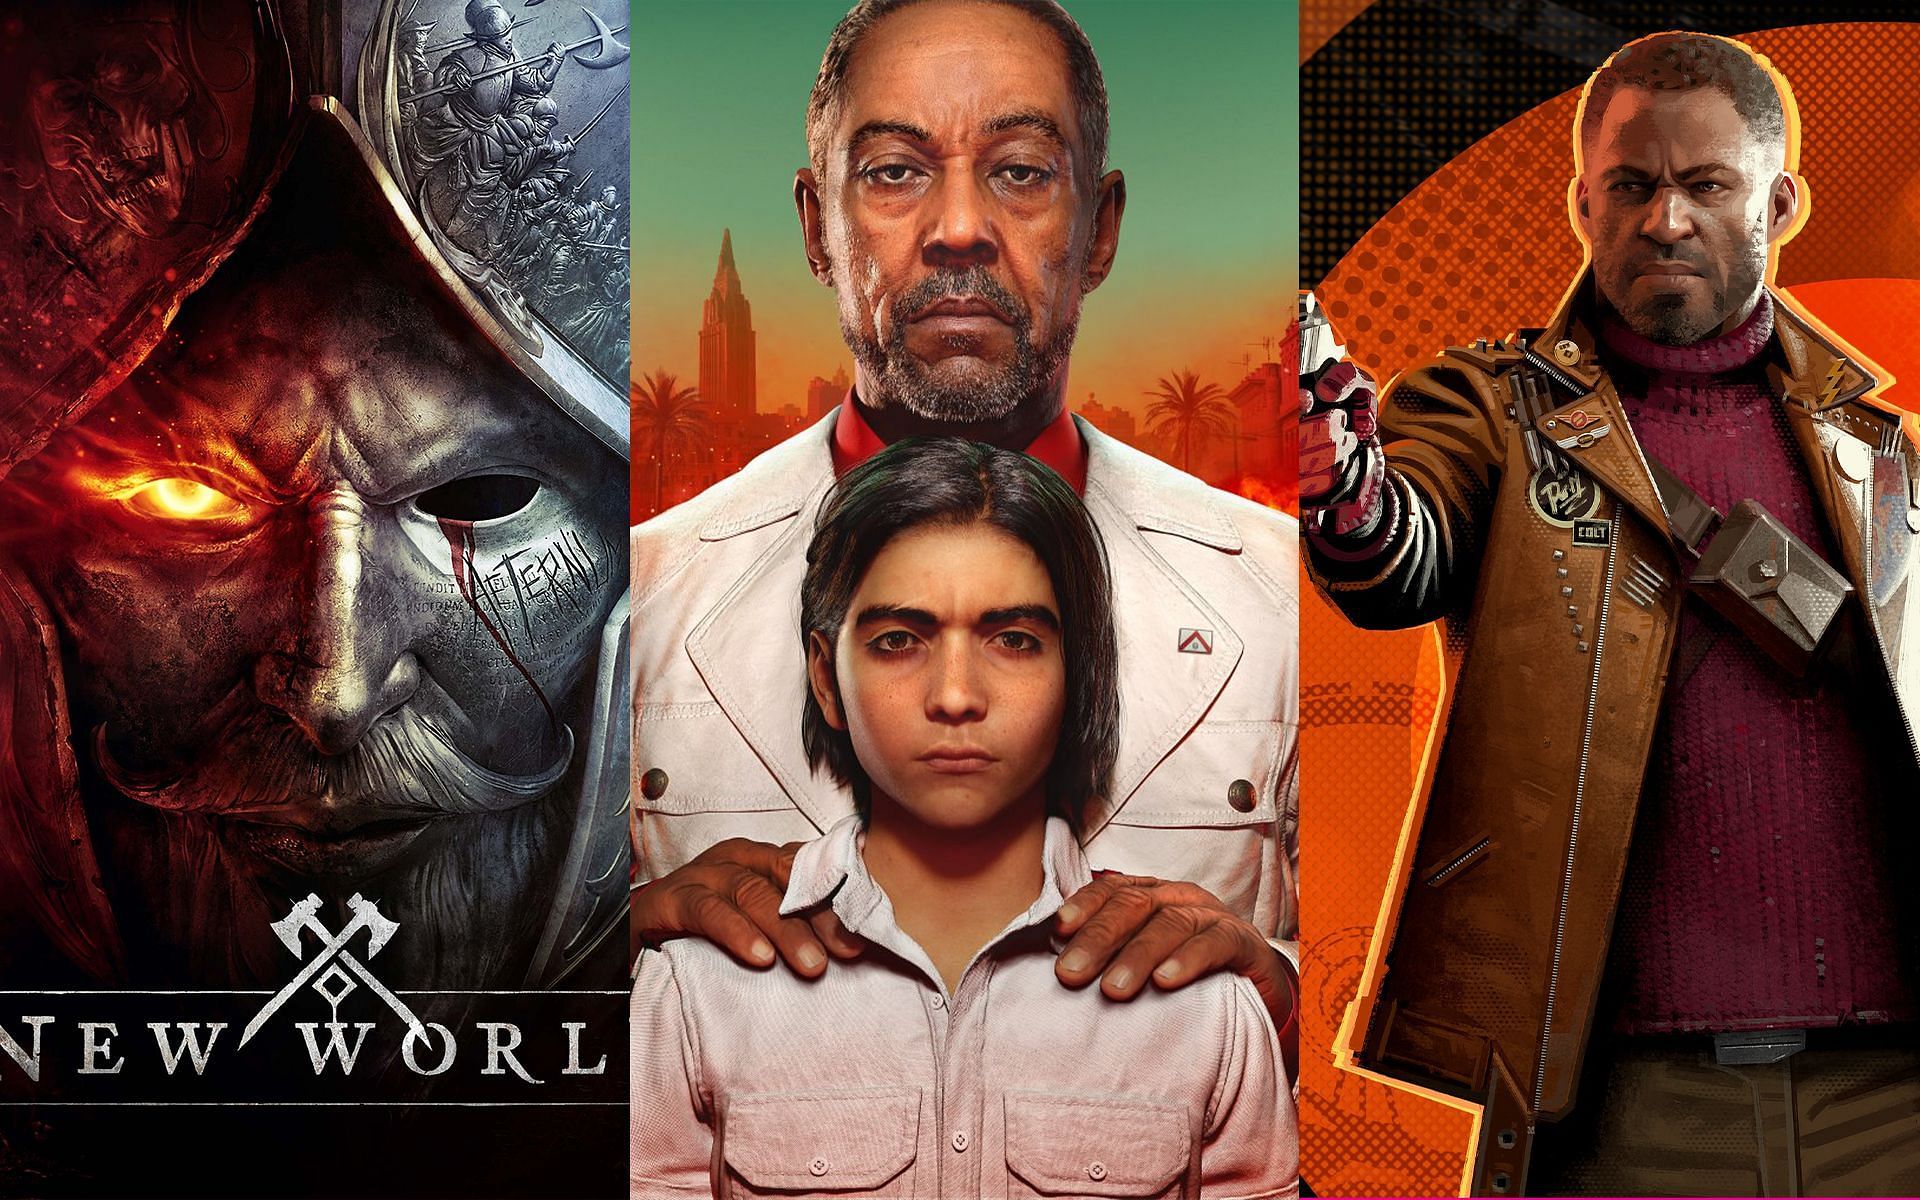 Some of the best PC games of 2021 (Image by Sportskeeda)